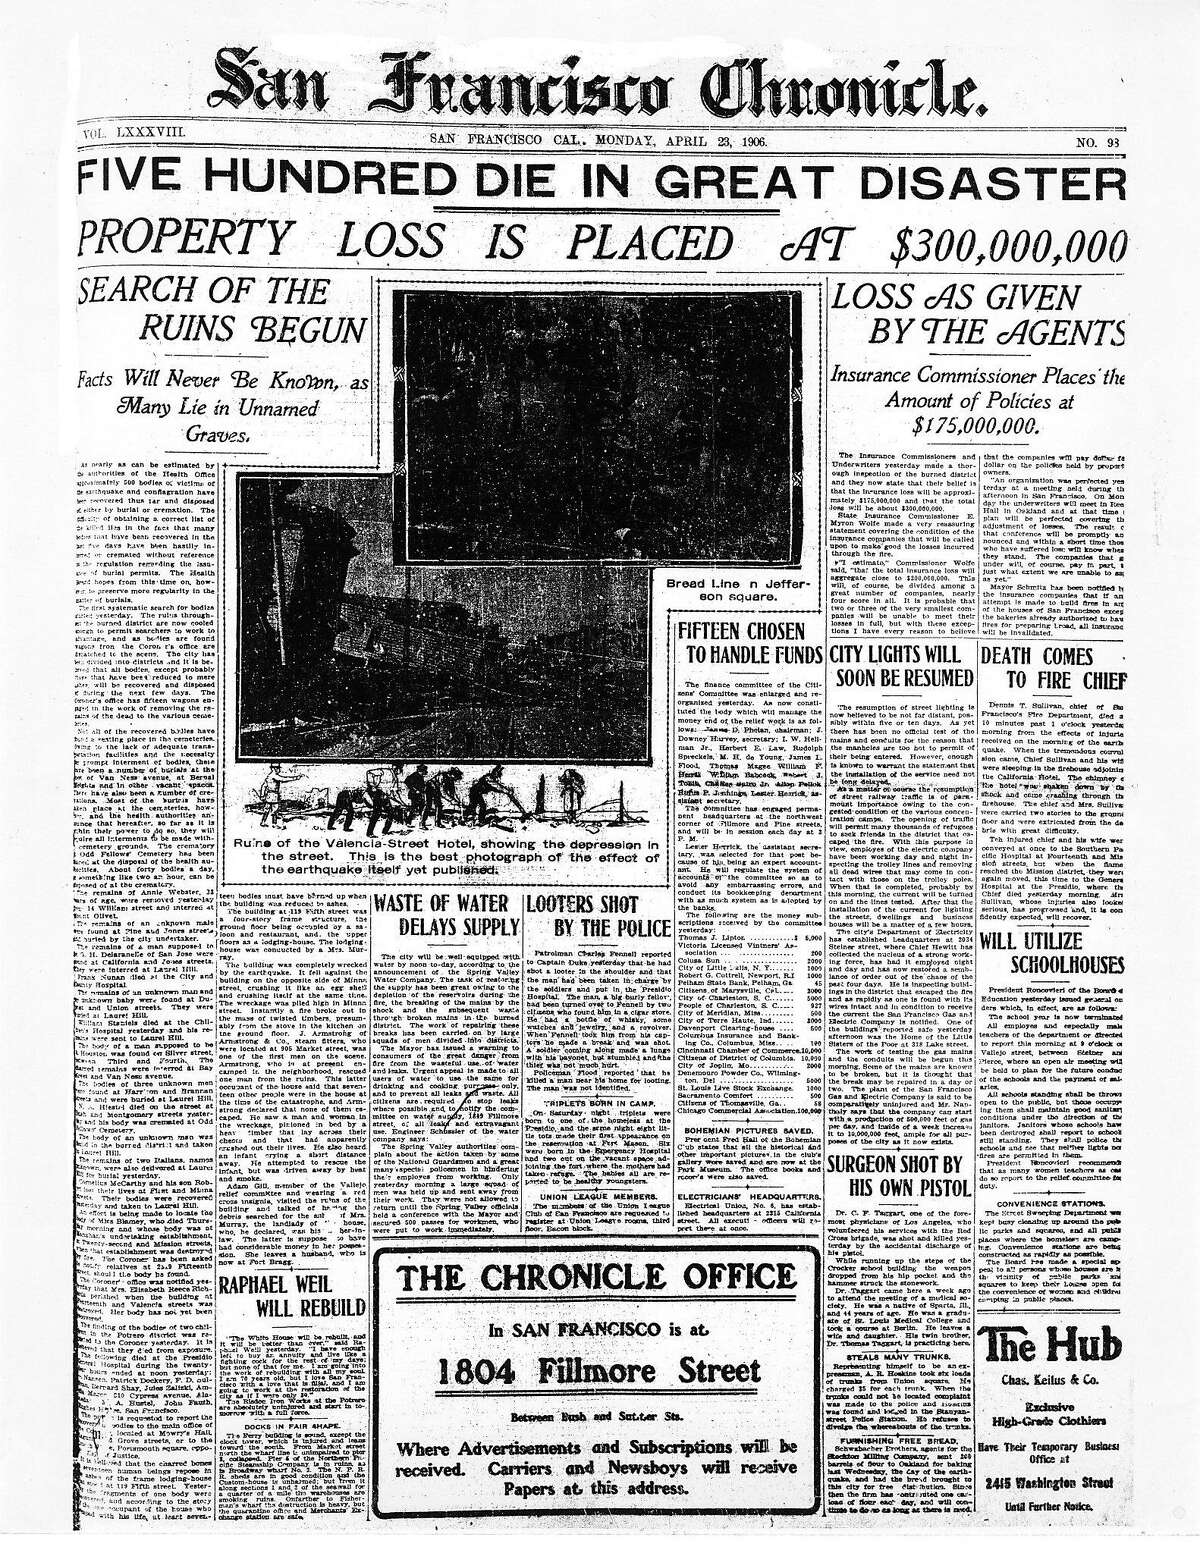 FRONT PAGE OF APRIL 23, 1906 paper .. assassing the damage and loss to the city.